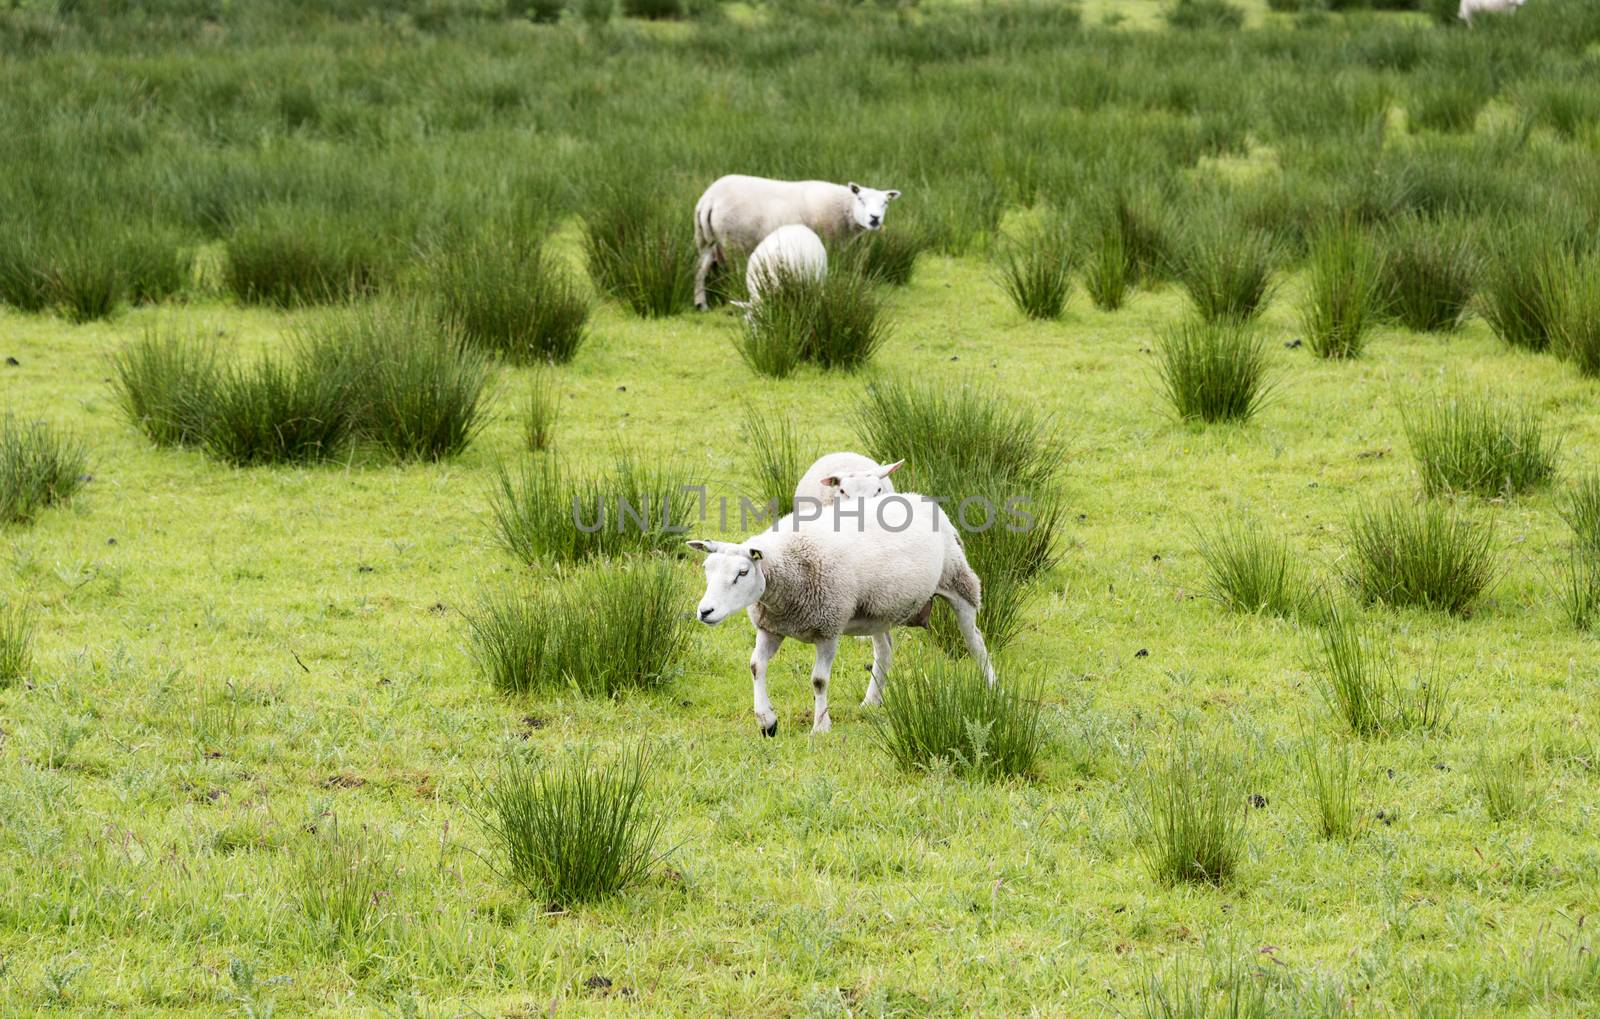 sheep grazing on field with green grass